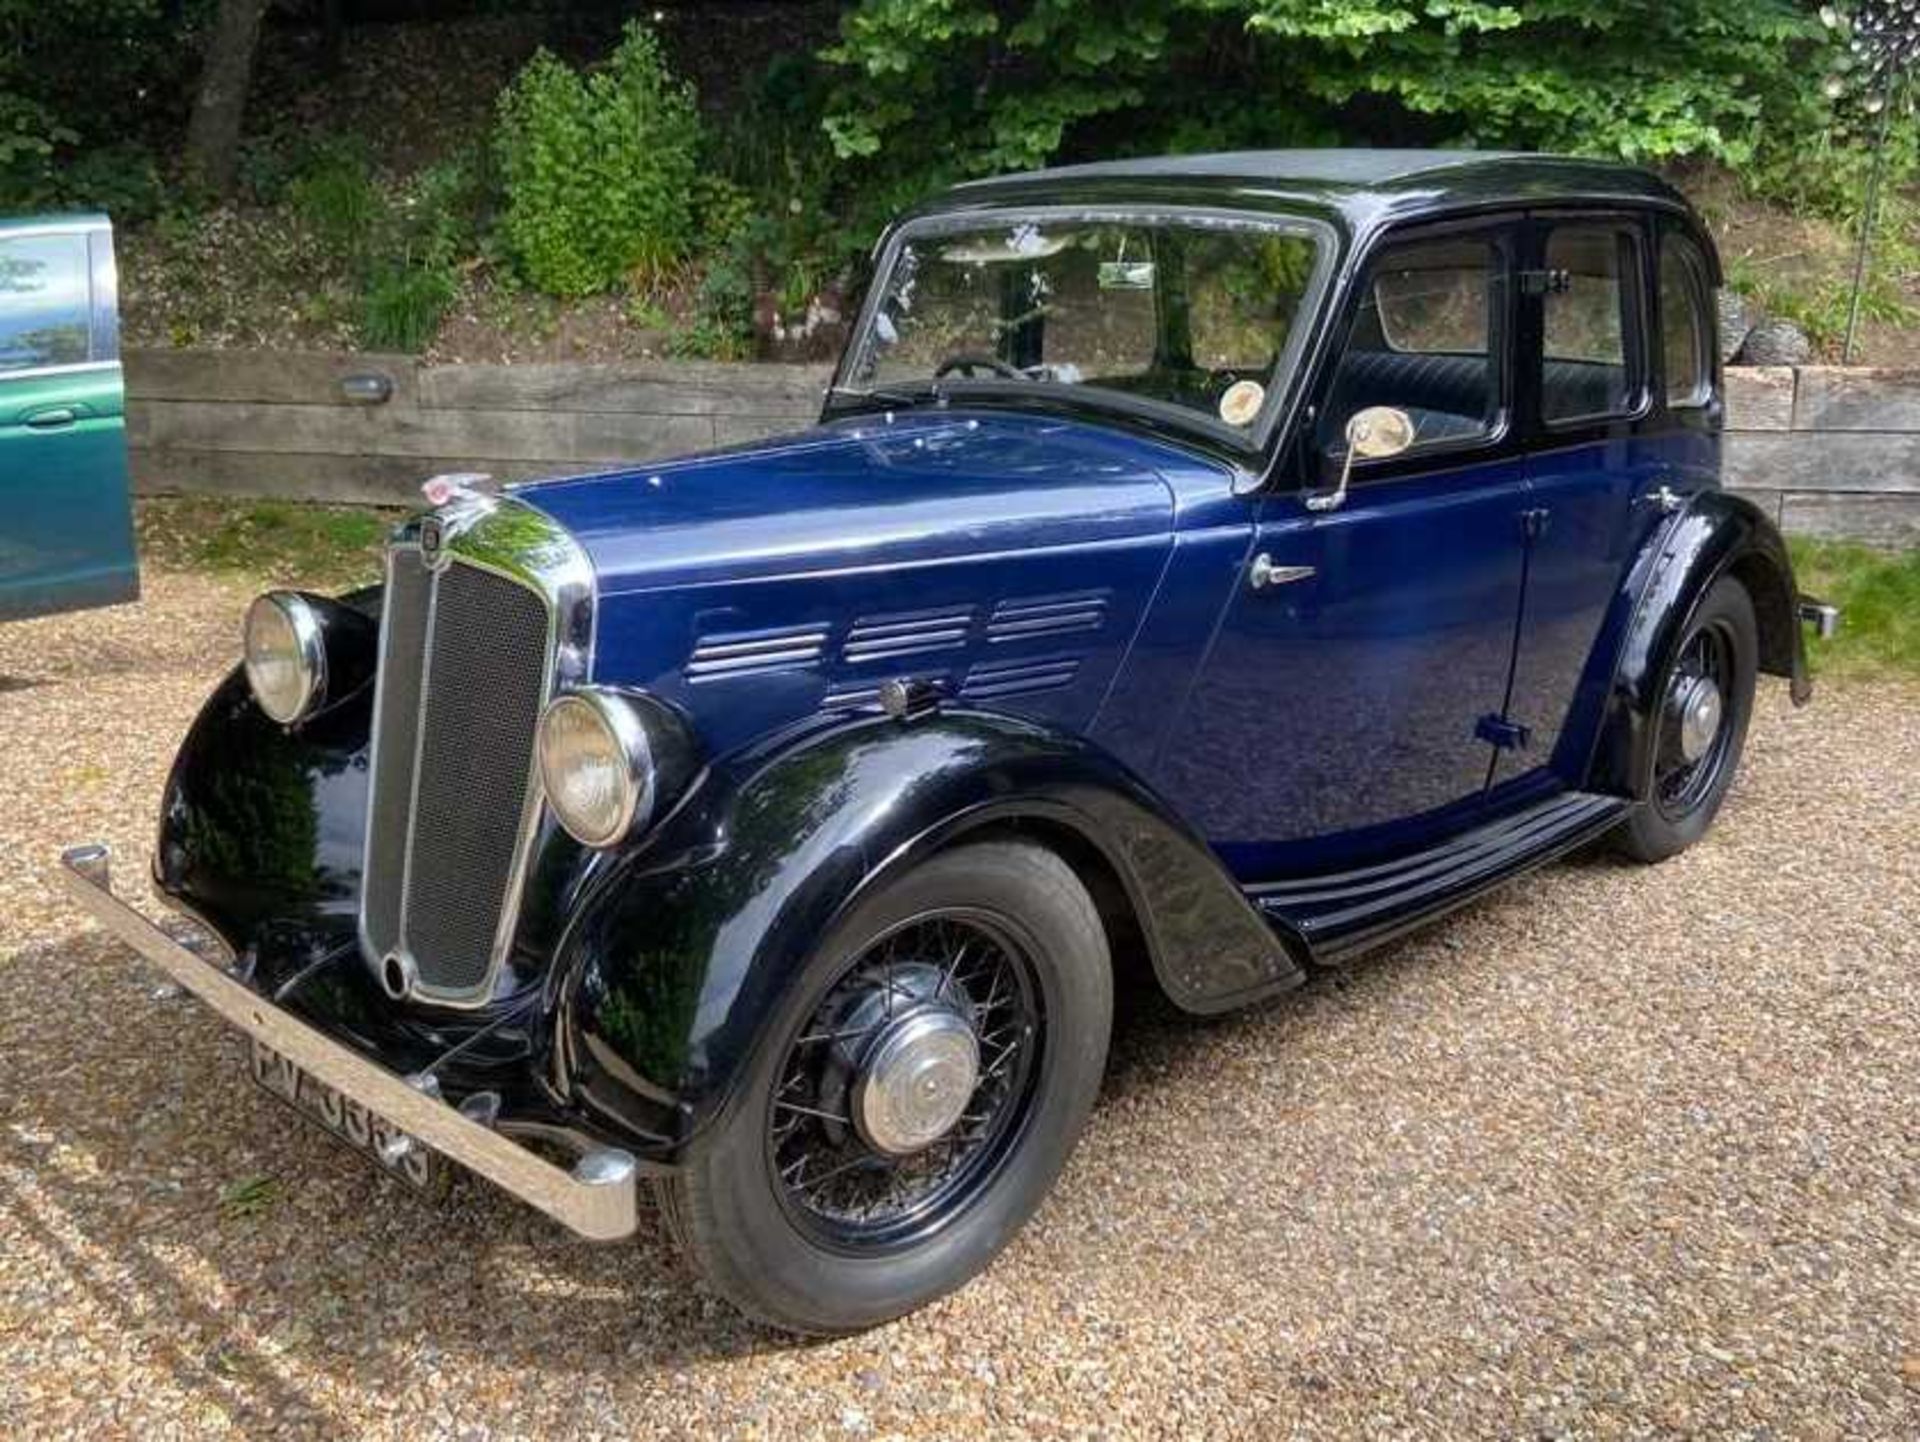 A 1936 Morris 10/4 saloon 1292cc Registration PV339 Odometer 555313 In blue and black Chassis No.